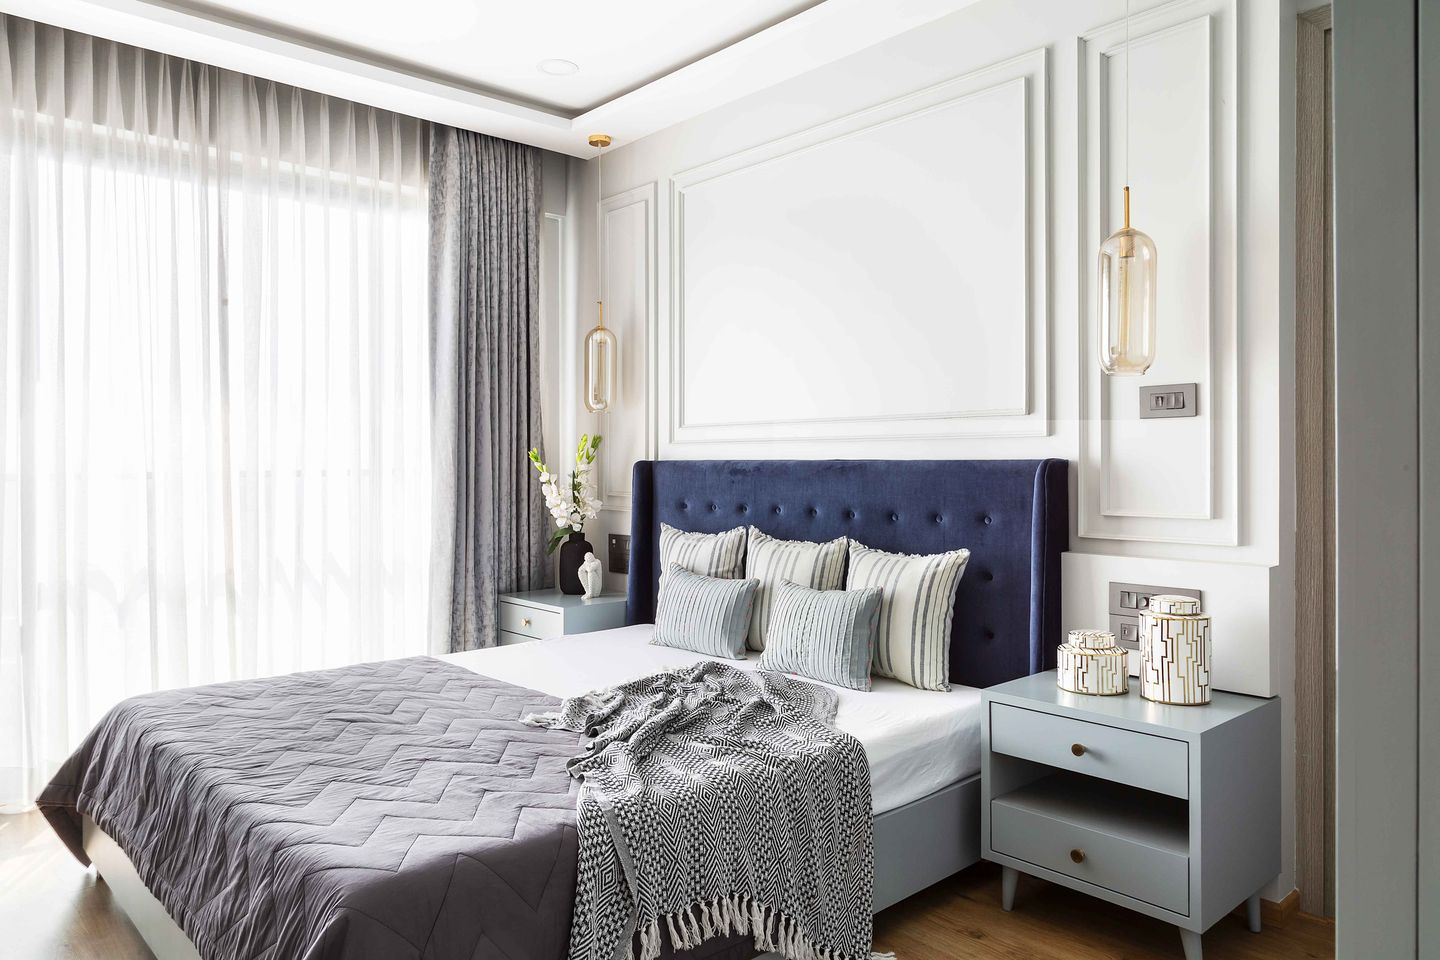 Bedroom Wall Design With Classic Wall Trims And Paint - Livspace